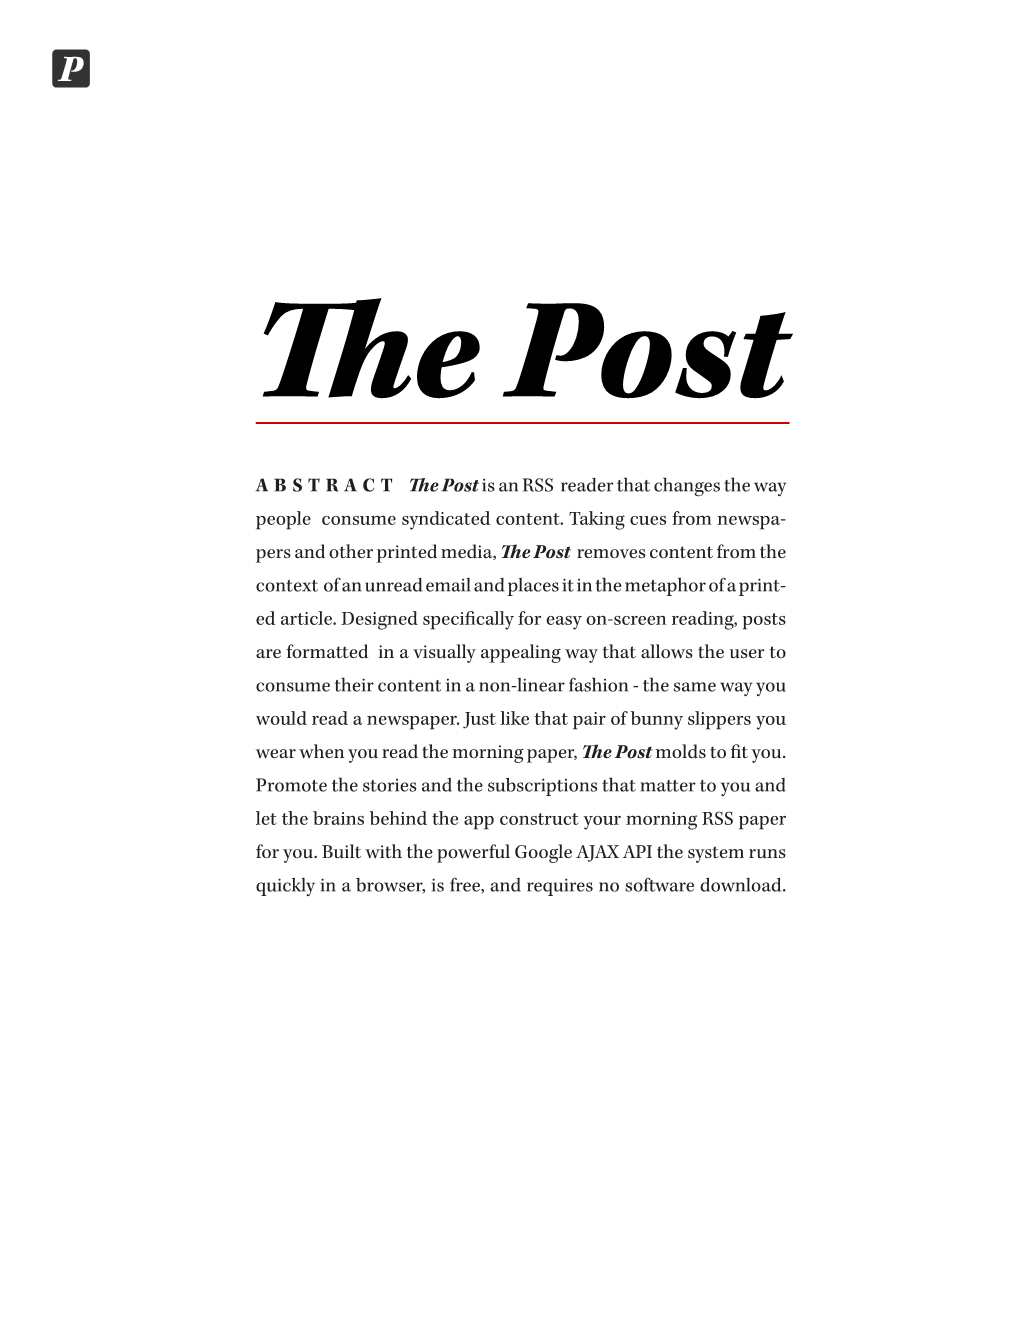 ABSTRACT the Postis an RSS Reader That Changes the Way People Consume Syndicated Content. Taking Cues from Newspa